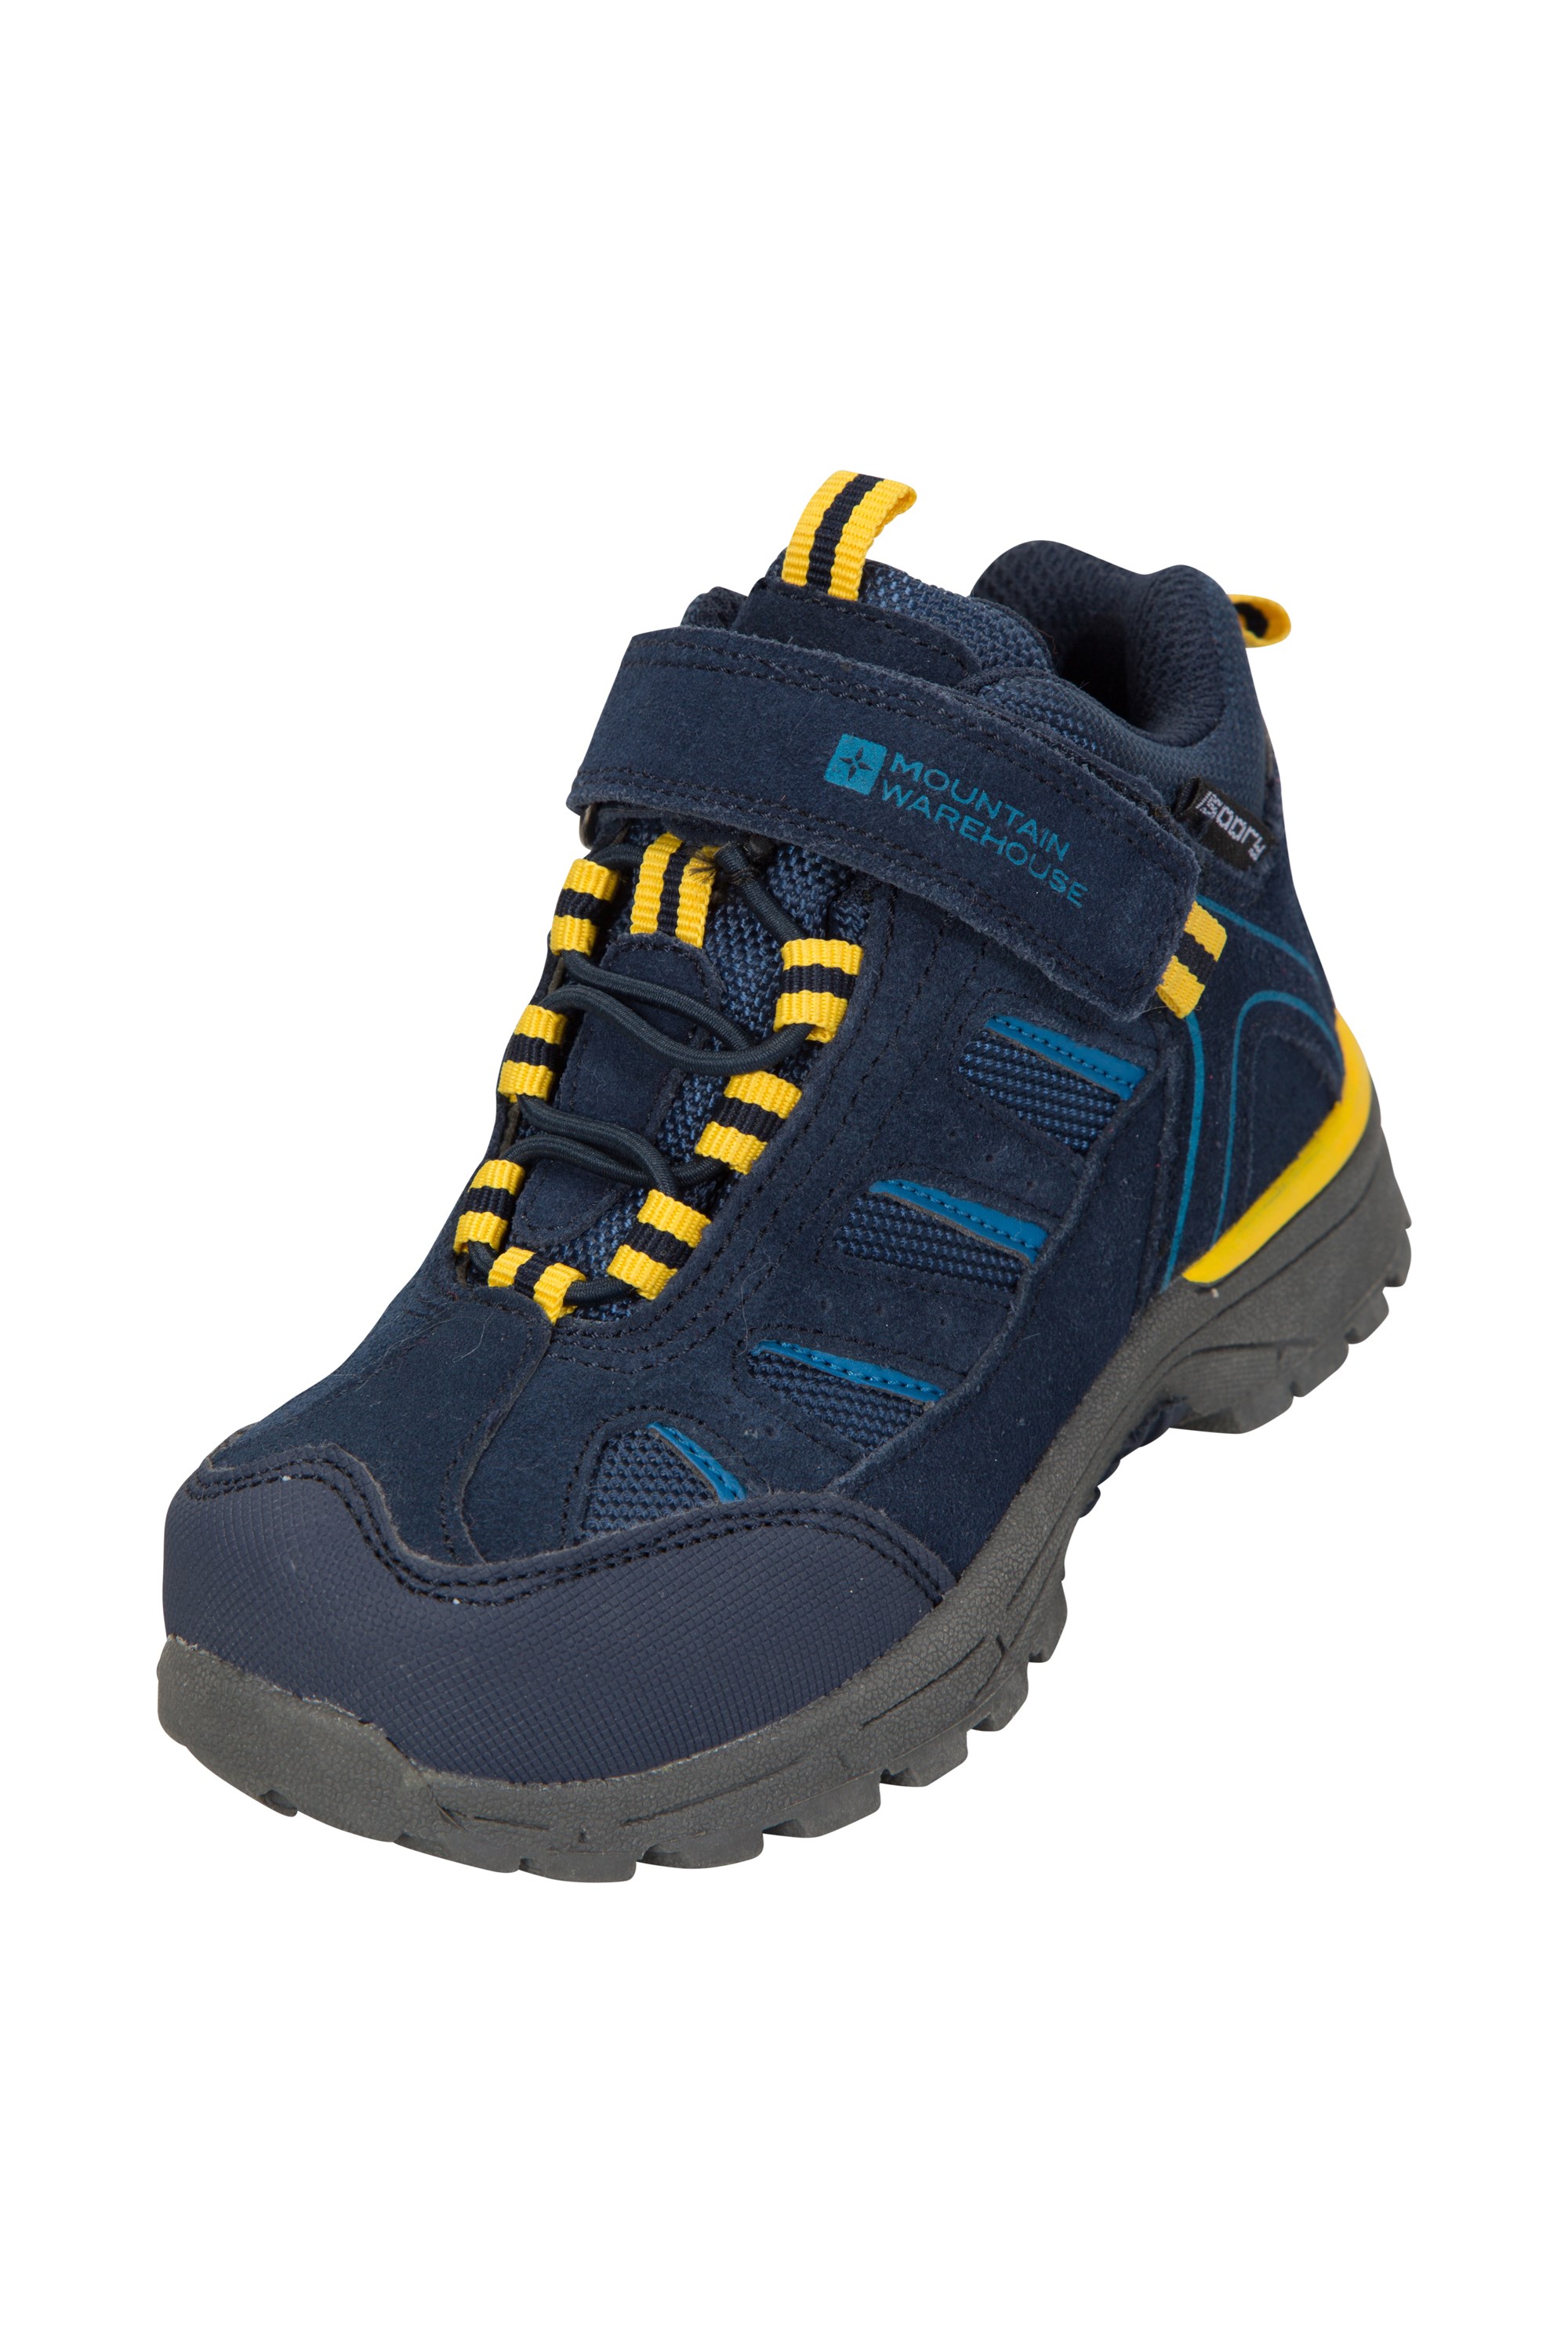 Breathable Childrens Hiking Boots 